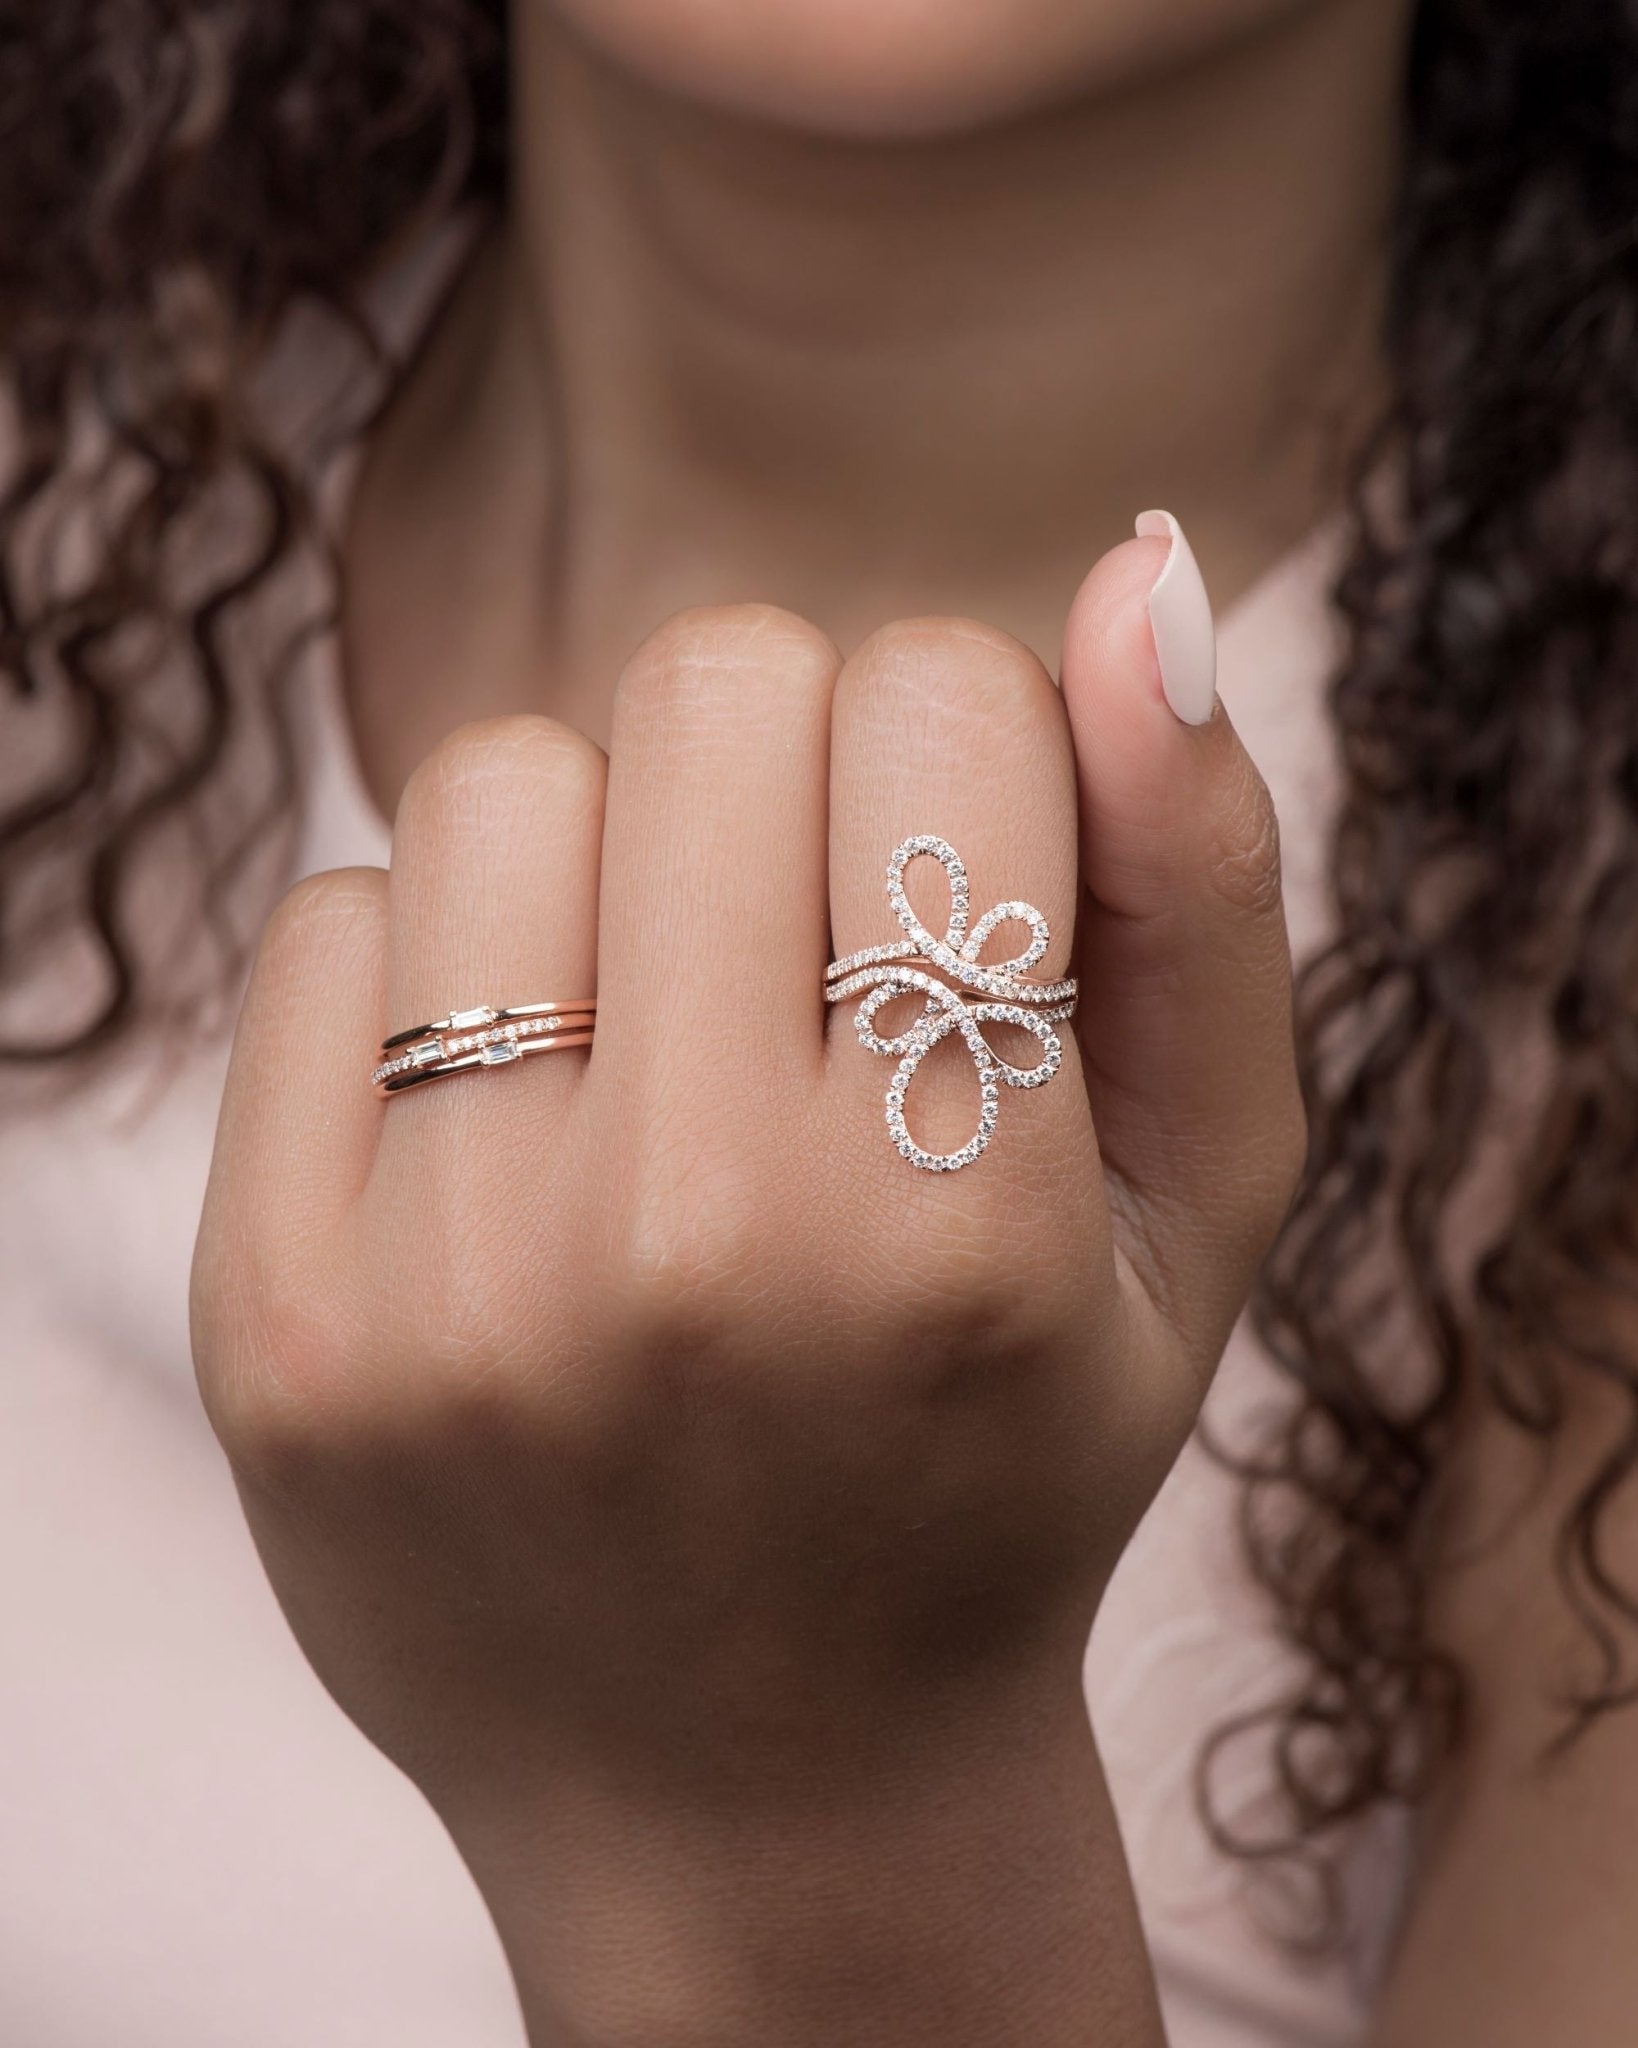 Abstract Diamond Flower Cocktail Ring Rings Estella Collection #product_description# 17231 Cocktail Ring Diamond Flower Jewelry #tag4# #tag5# #tag6# #tag7# #tag8# #tag9# #tag10# 6